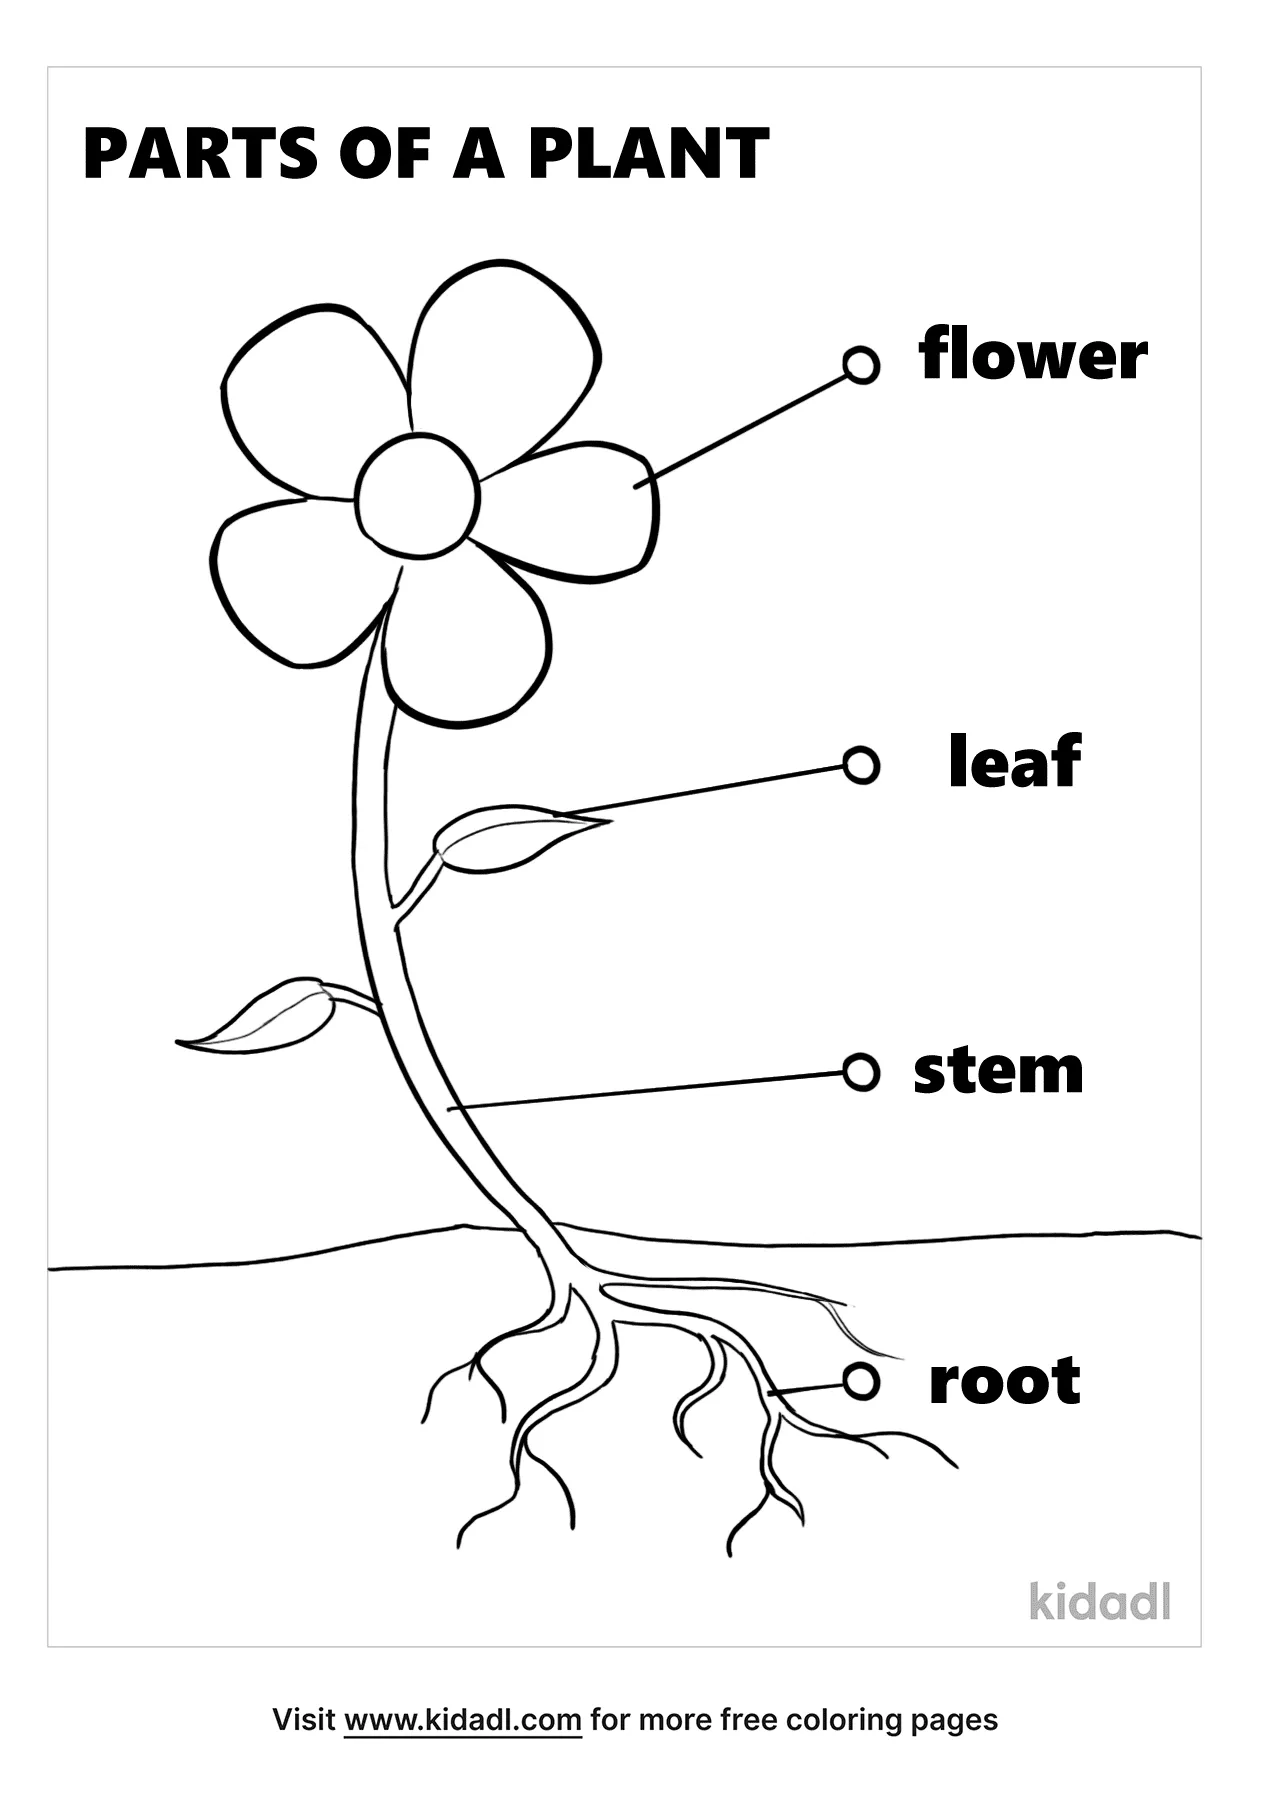 Free parts of a plant coloring page coloring page printables